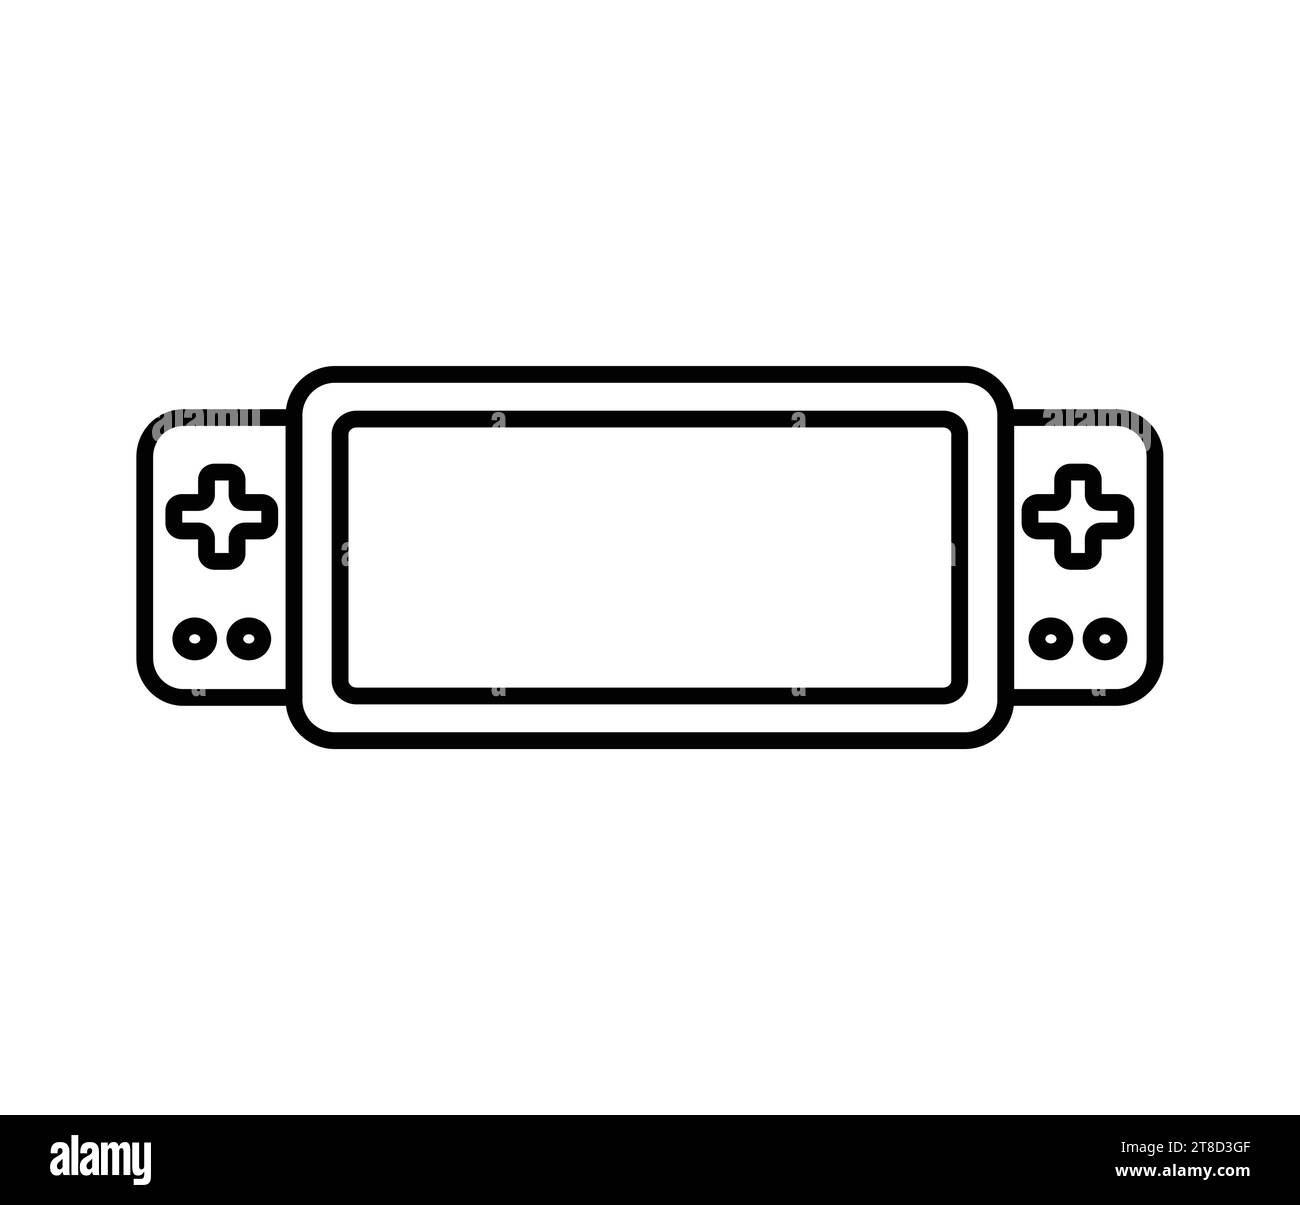 Portable handheld retro gaming console. Outline icon. Vector illustration. Object isolated on white background. Stock Vector